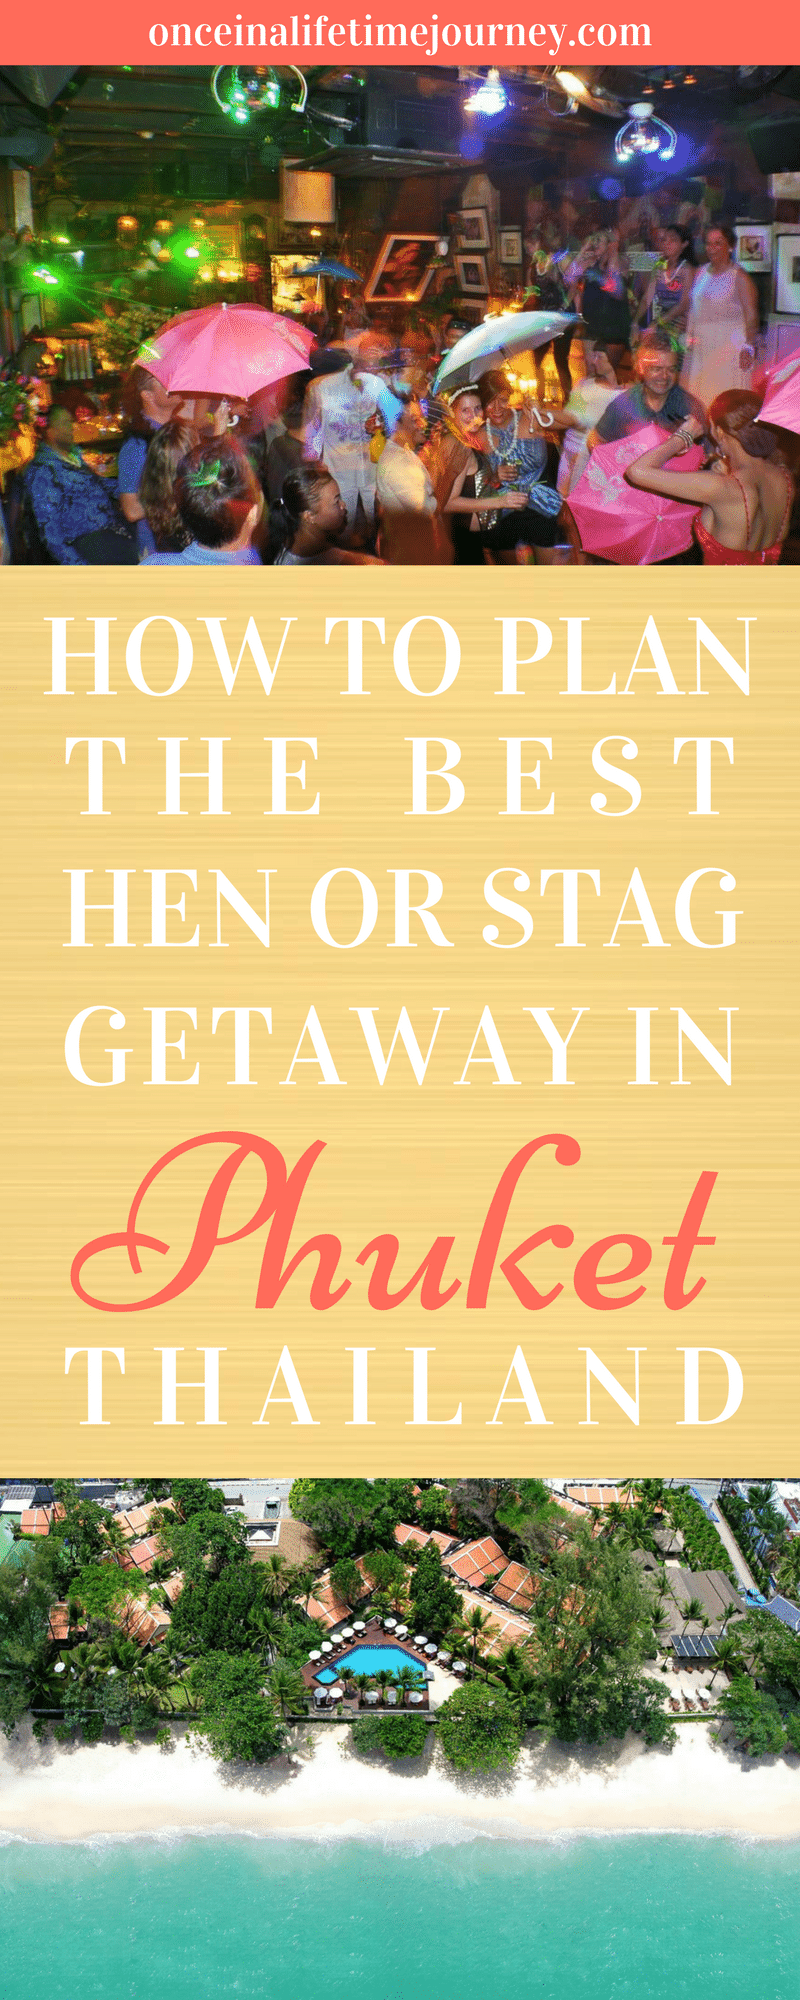 How to Plan the Best Hen or Stag Getaway in Phuket Thailand